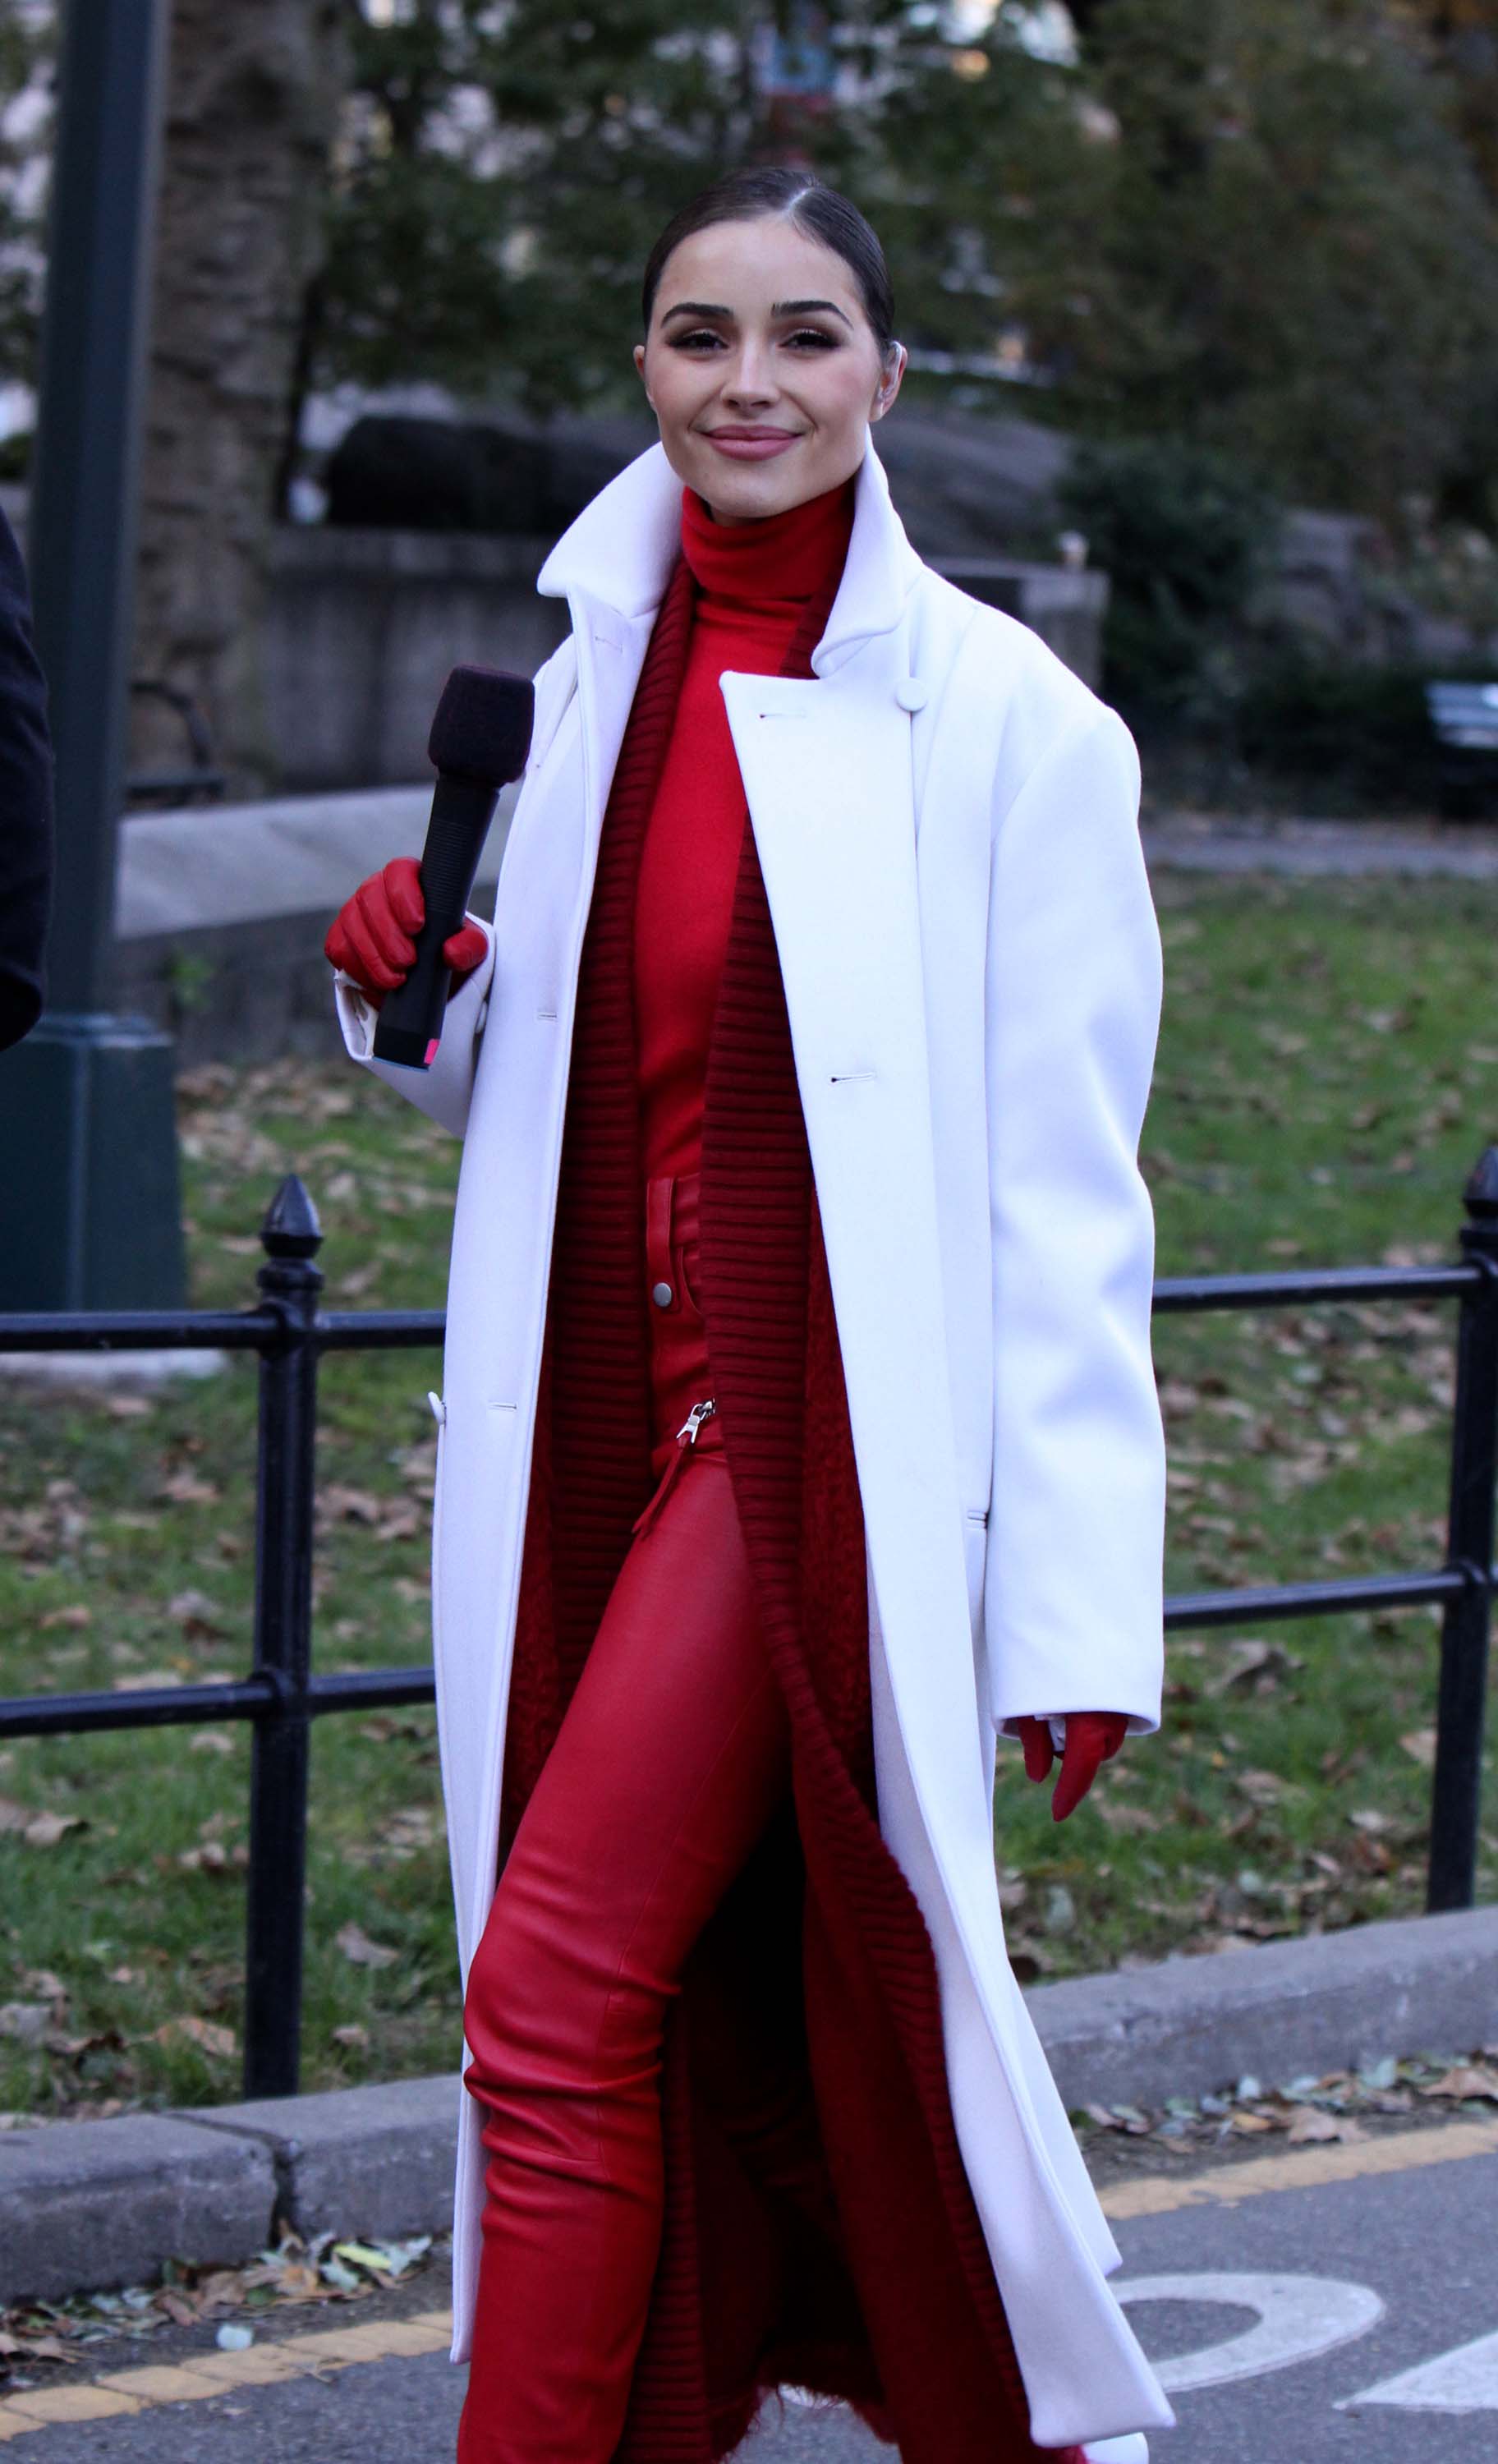 Olivia Culpo attends the Macy’s Thanksgiving Day Parade